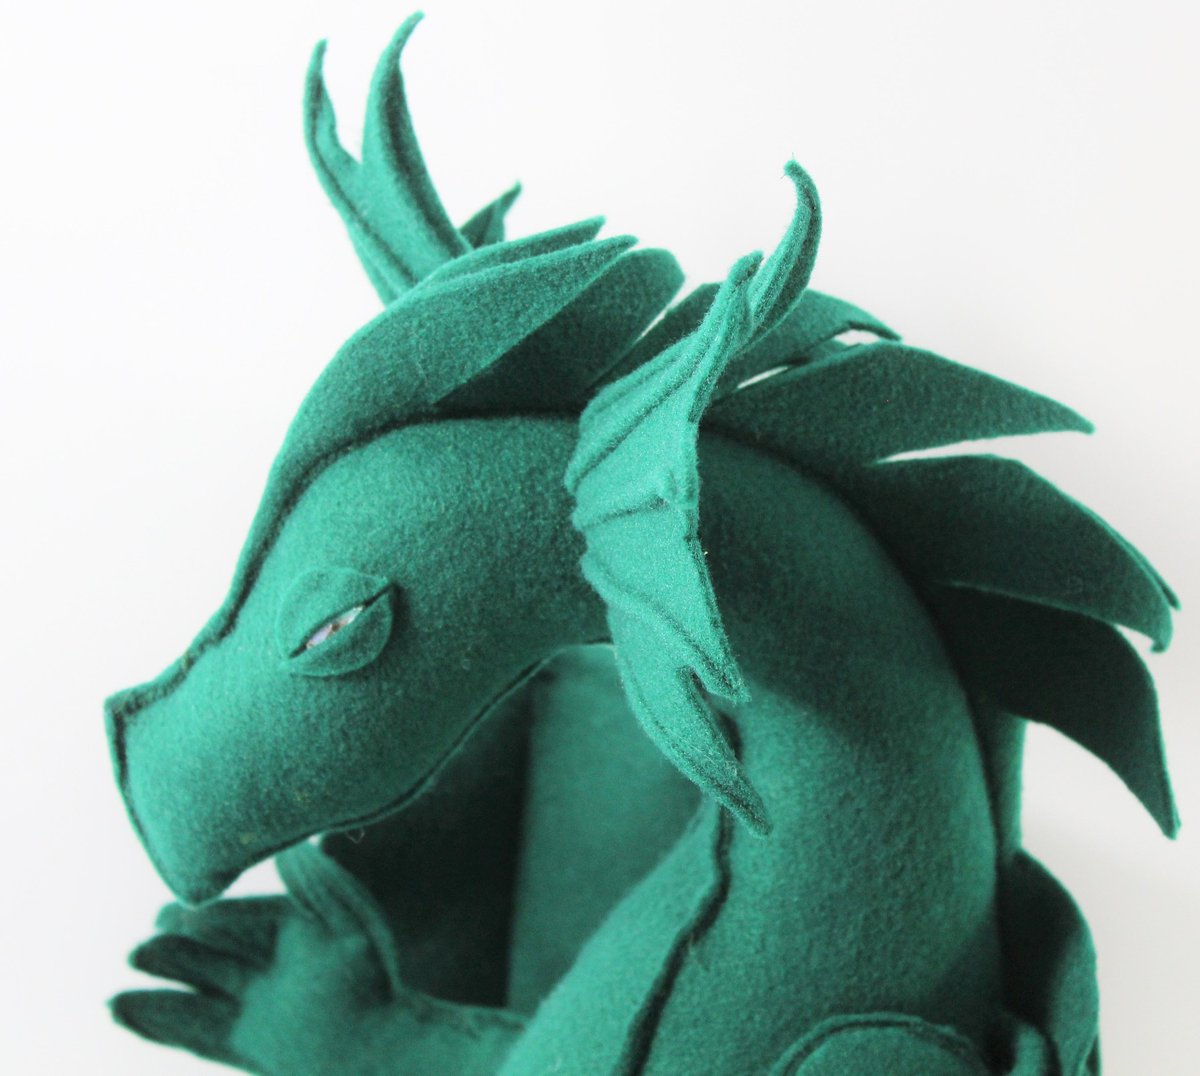 NEW! Moonlit dragon pattern! Only pattern without sewing instructions! etsy.me/2XeD4D2 #toys #dragon #dragons #patterns #pattern #dragonpattern #dragonspattern #forkids #diy #plushpattern #plushdiy #fantasydiy #fantasypattern #vikings #etsy #etsypattern